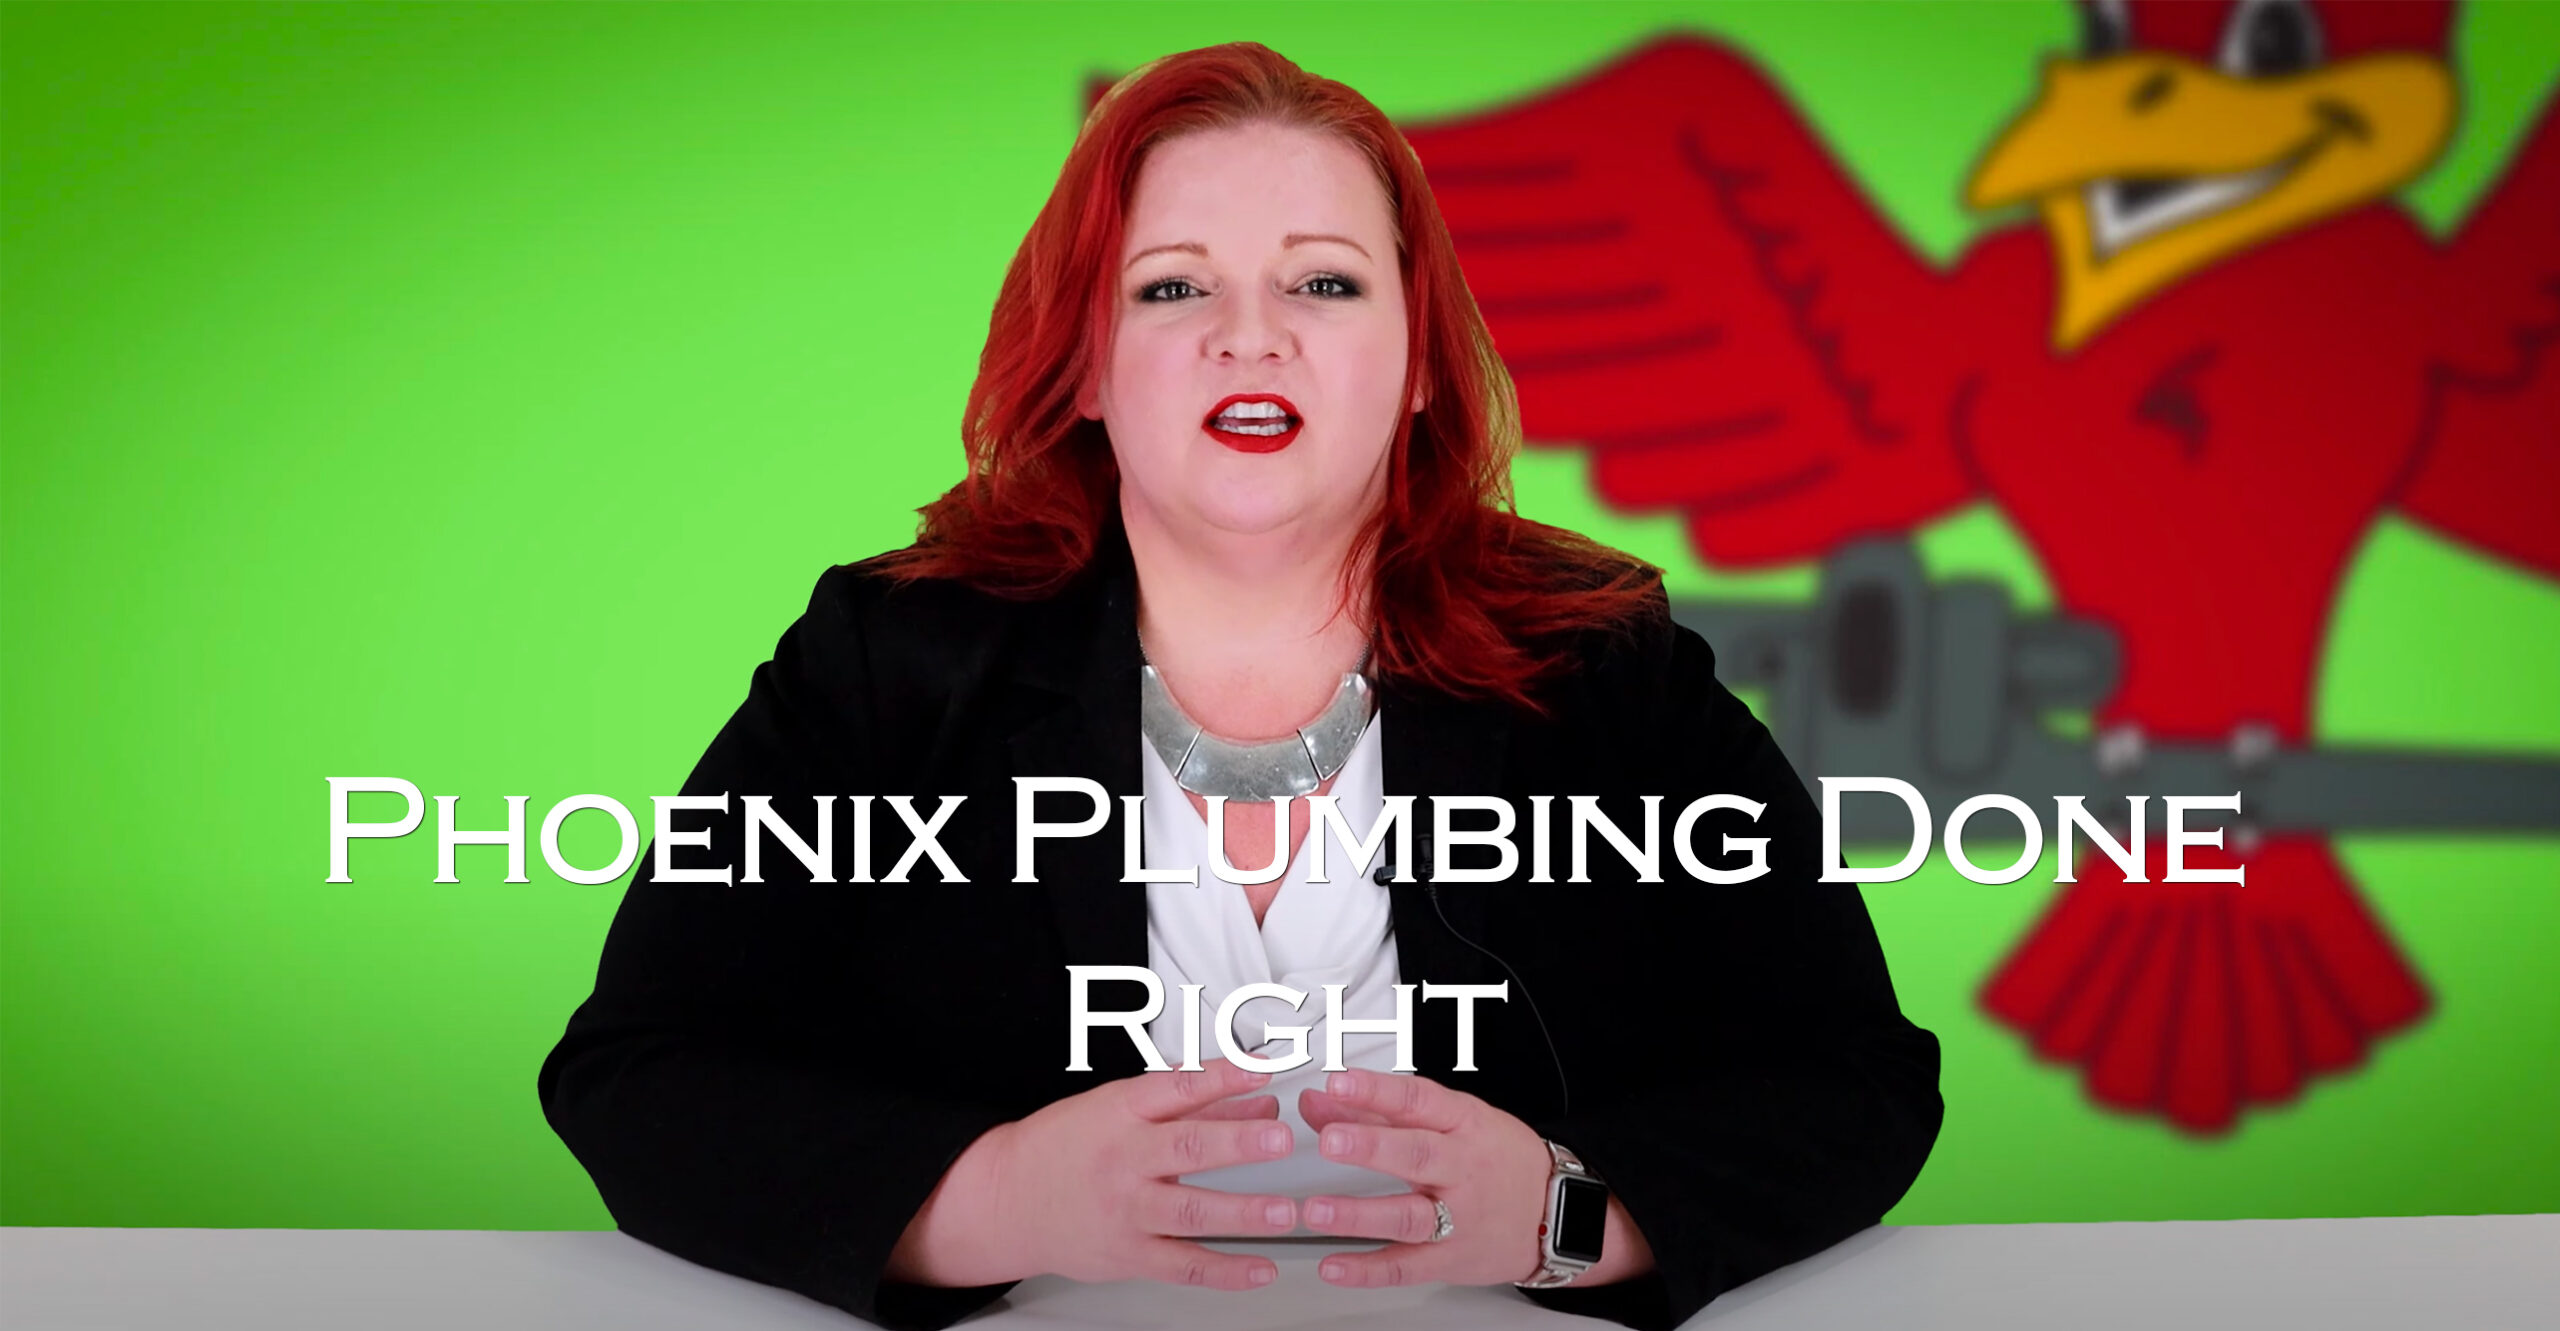 Robins Plumbing owner Stephanie with featured blog titled 'Phoenix Plumbing Done Right'